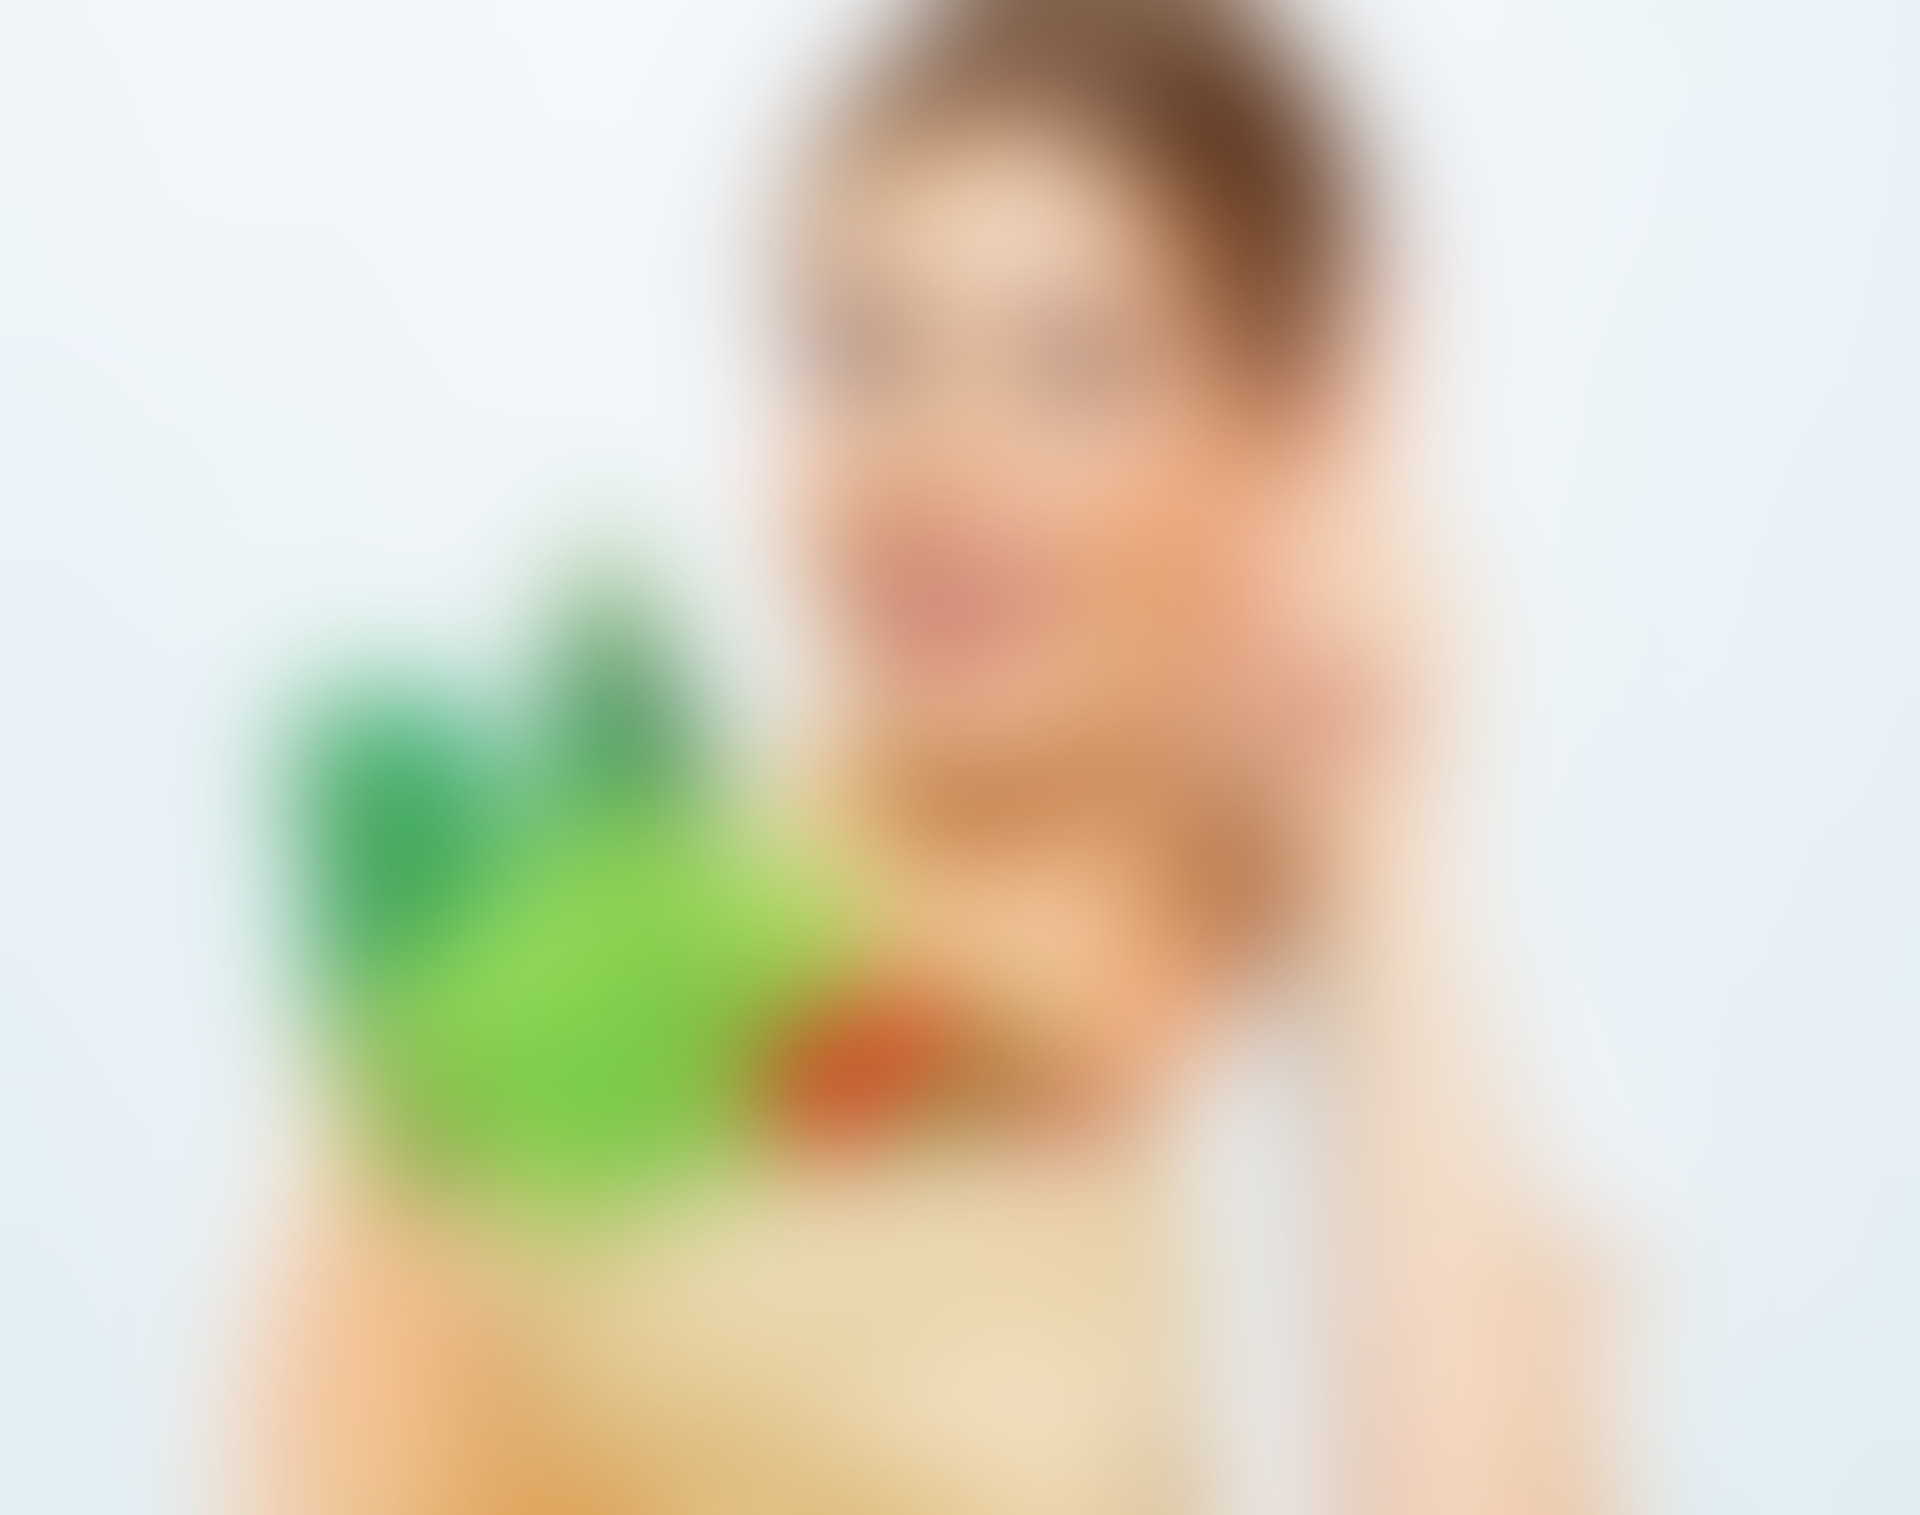 A blurry picture of a woman holding a green object.